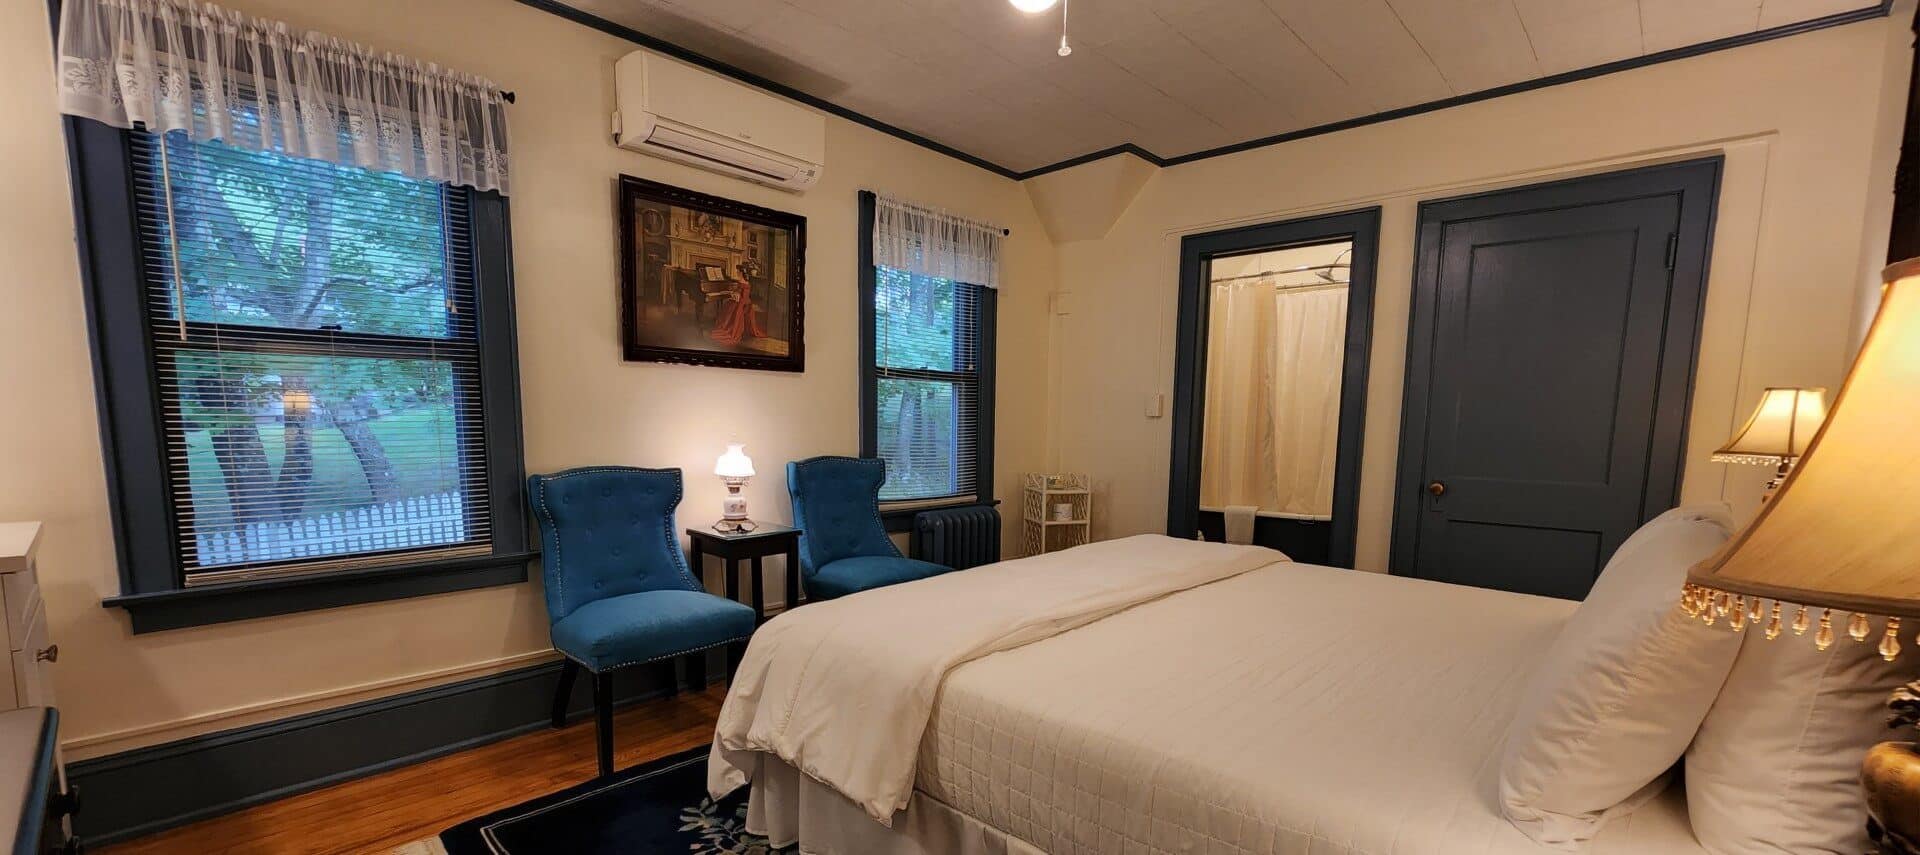 Guest room with bed in white linens, dark blue accents, two sitting chairs and large windows with lace valences